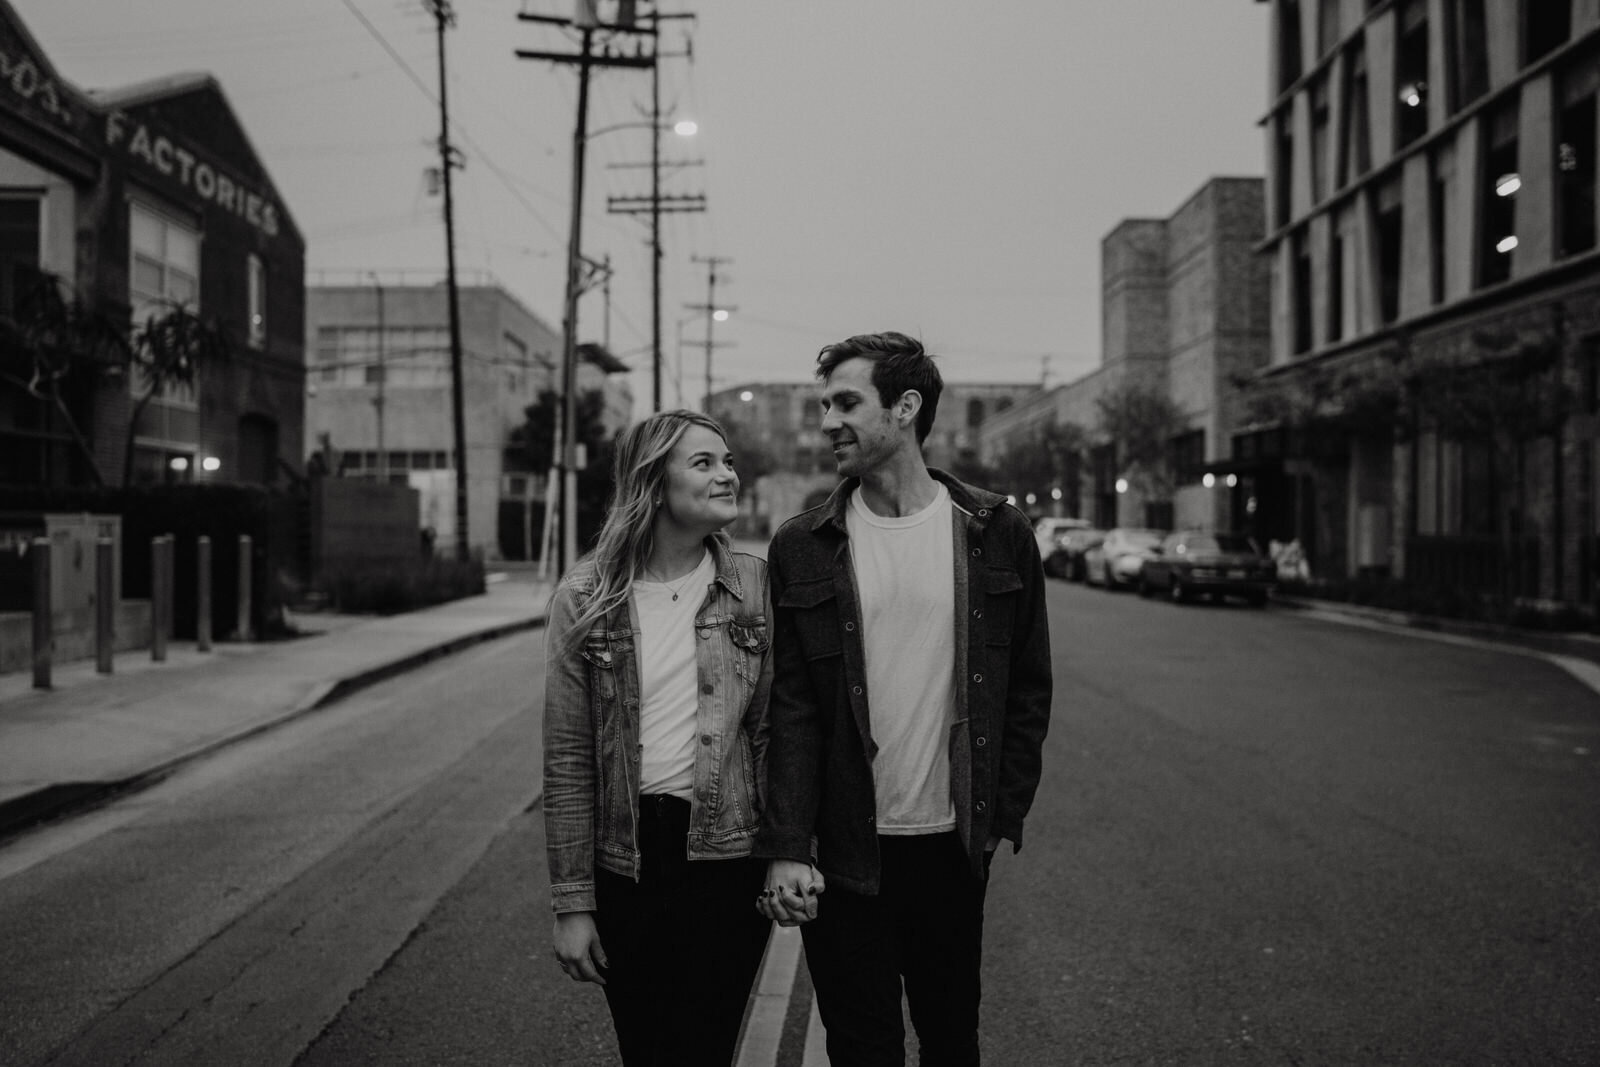 Dark and moody sunrise engagement photos in the LA Arts District | Fun, edgy, urban couples photos | Downtown LA Engagement photos | Photo by Kept Record | www.keptrecord.com